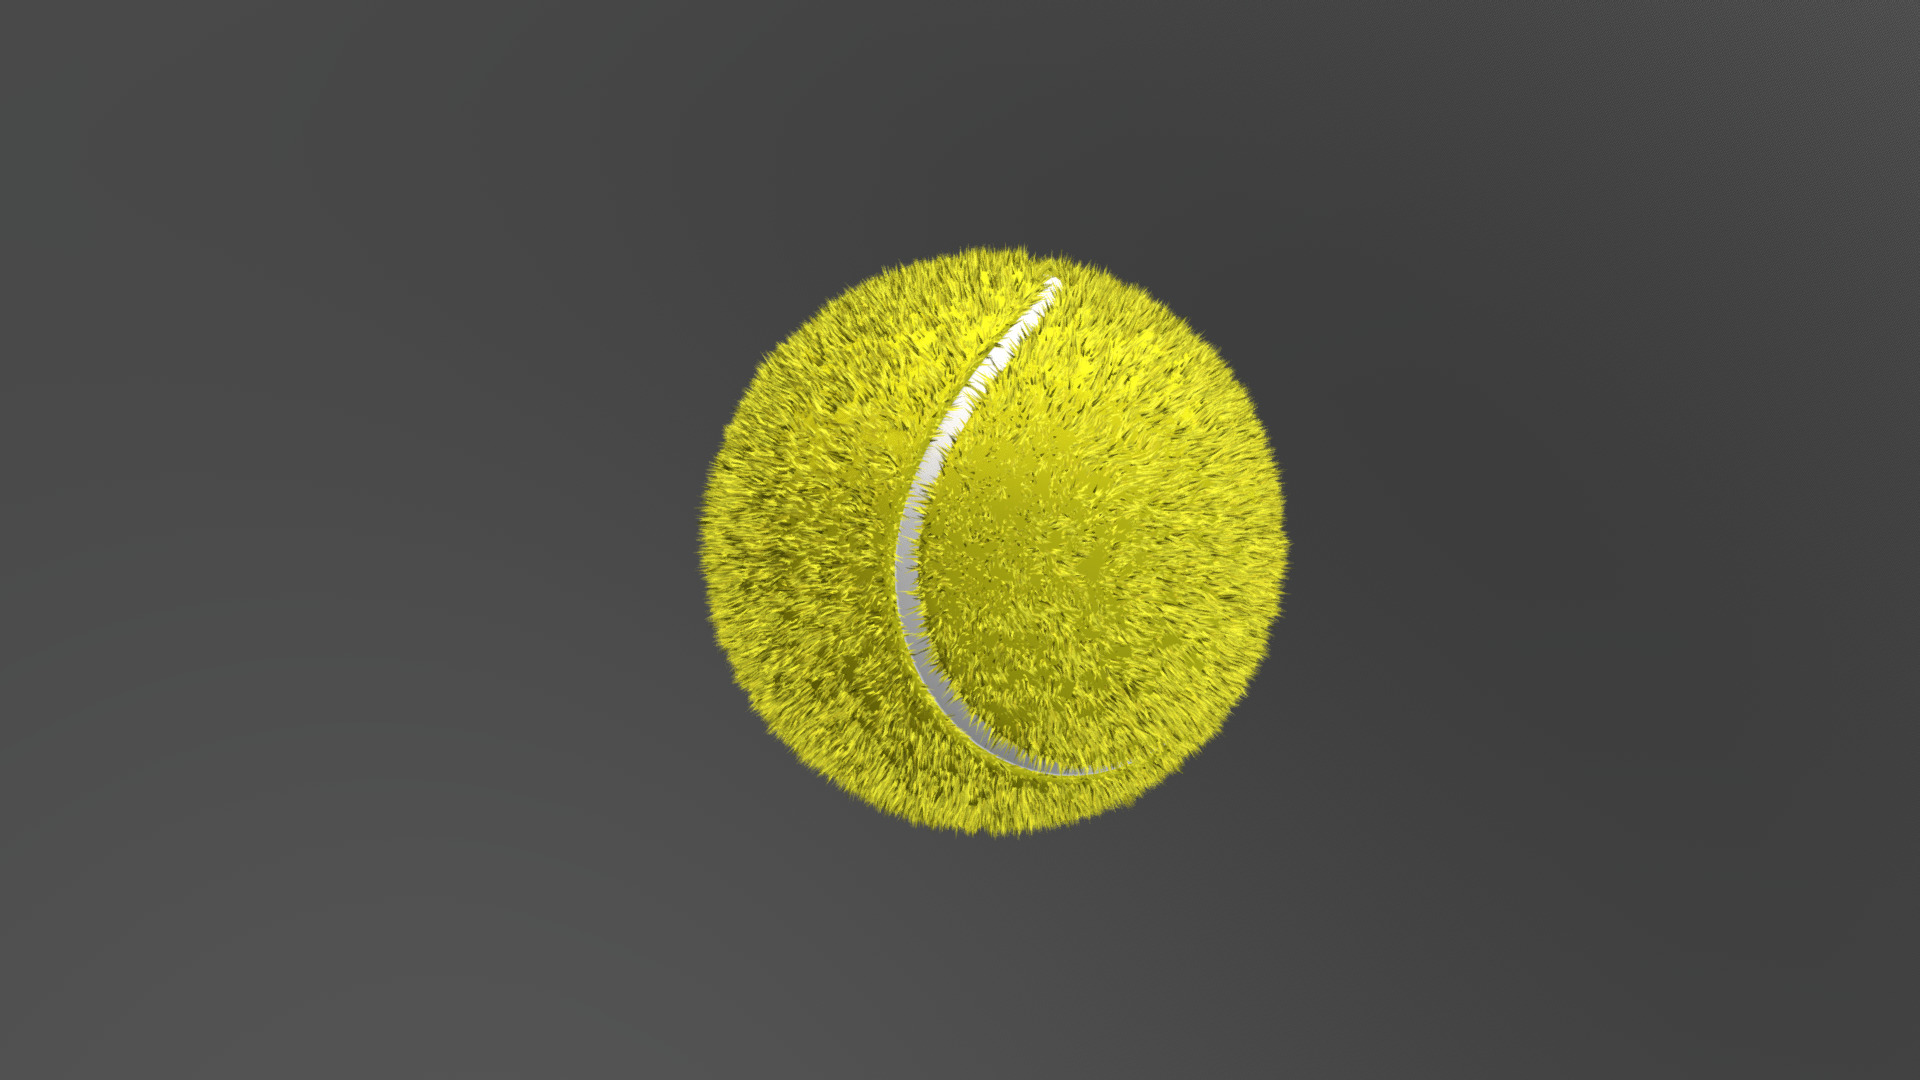 3D model Tennis ball - This is a 3D model of the Tennis ball. The 3D model is about a tennis ball on a black background.